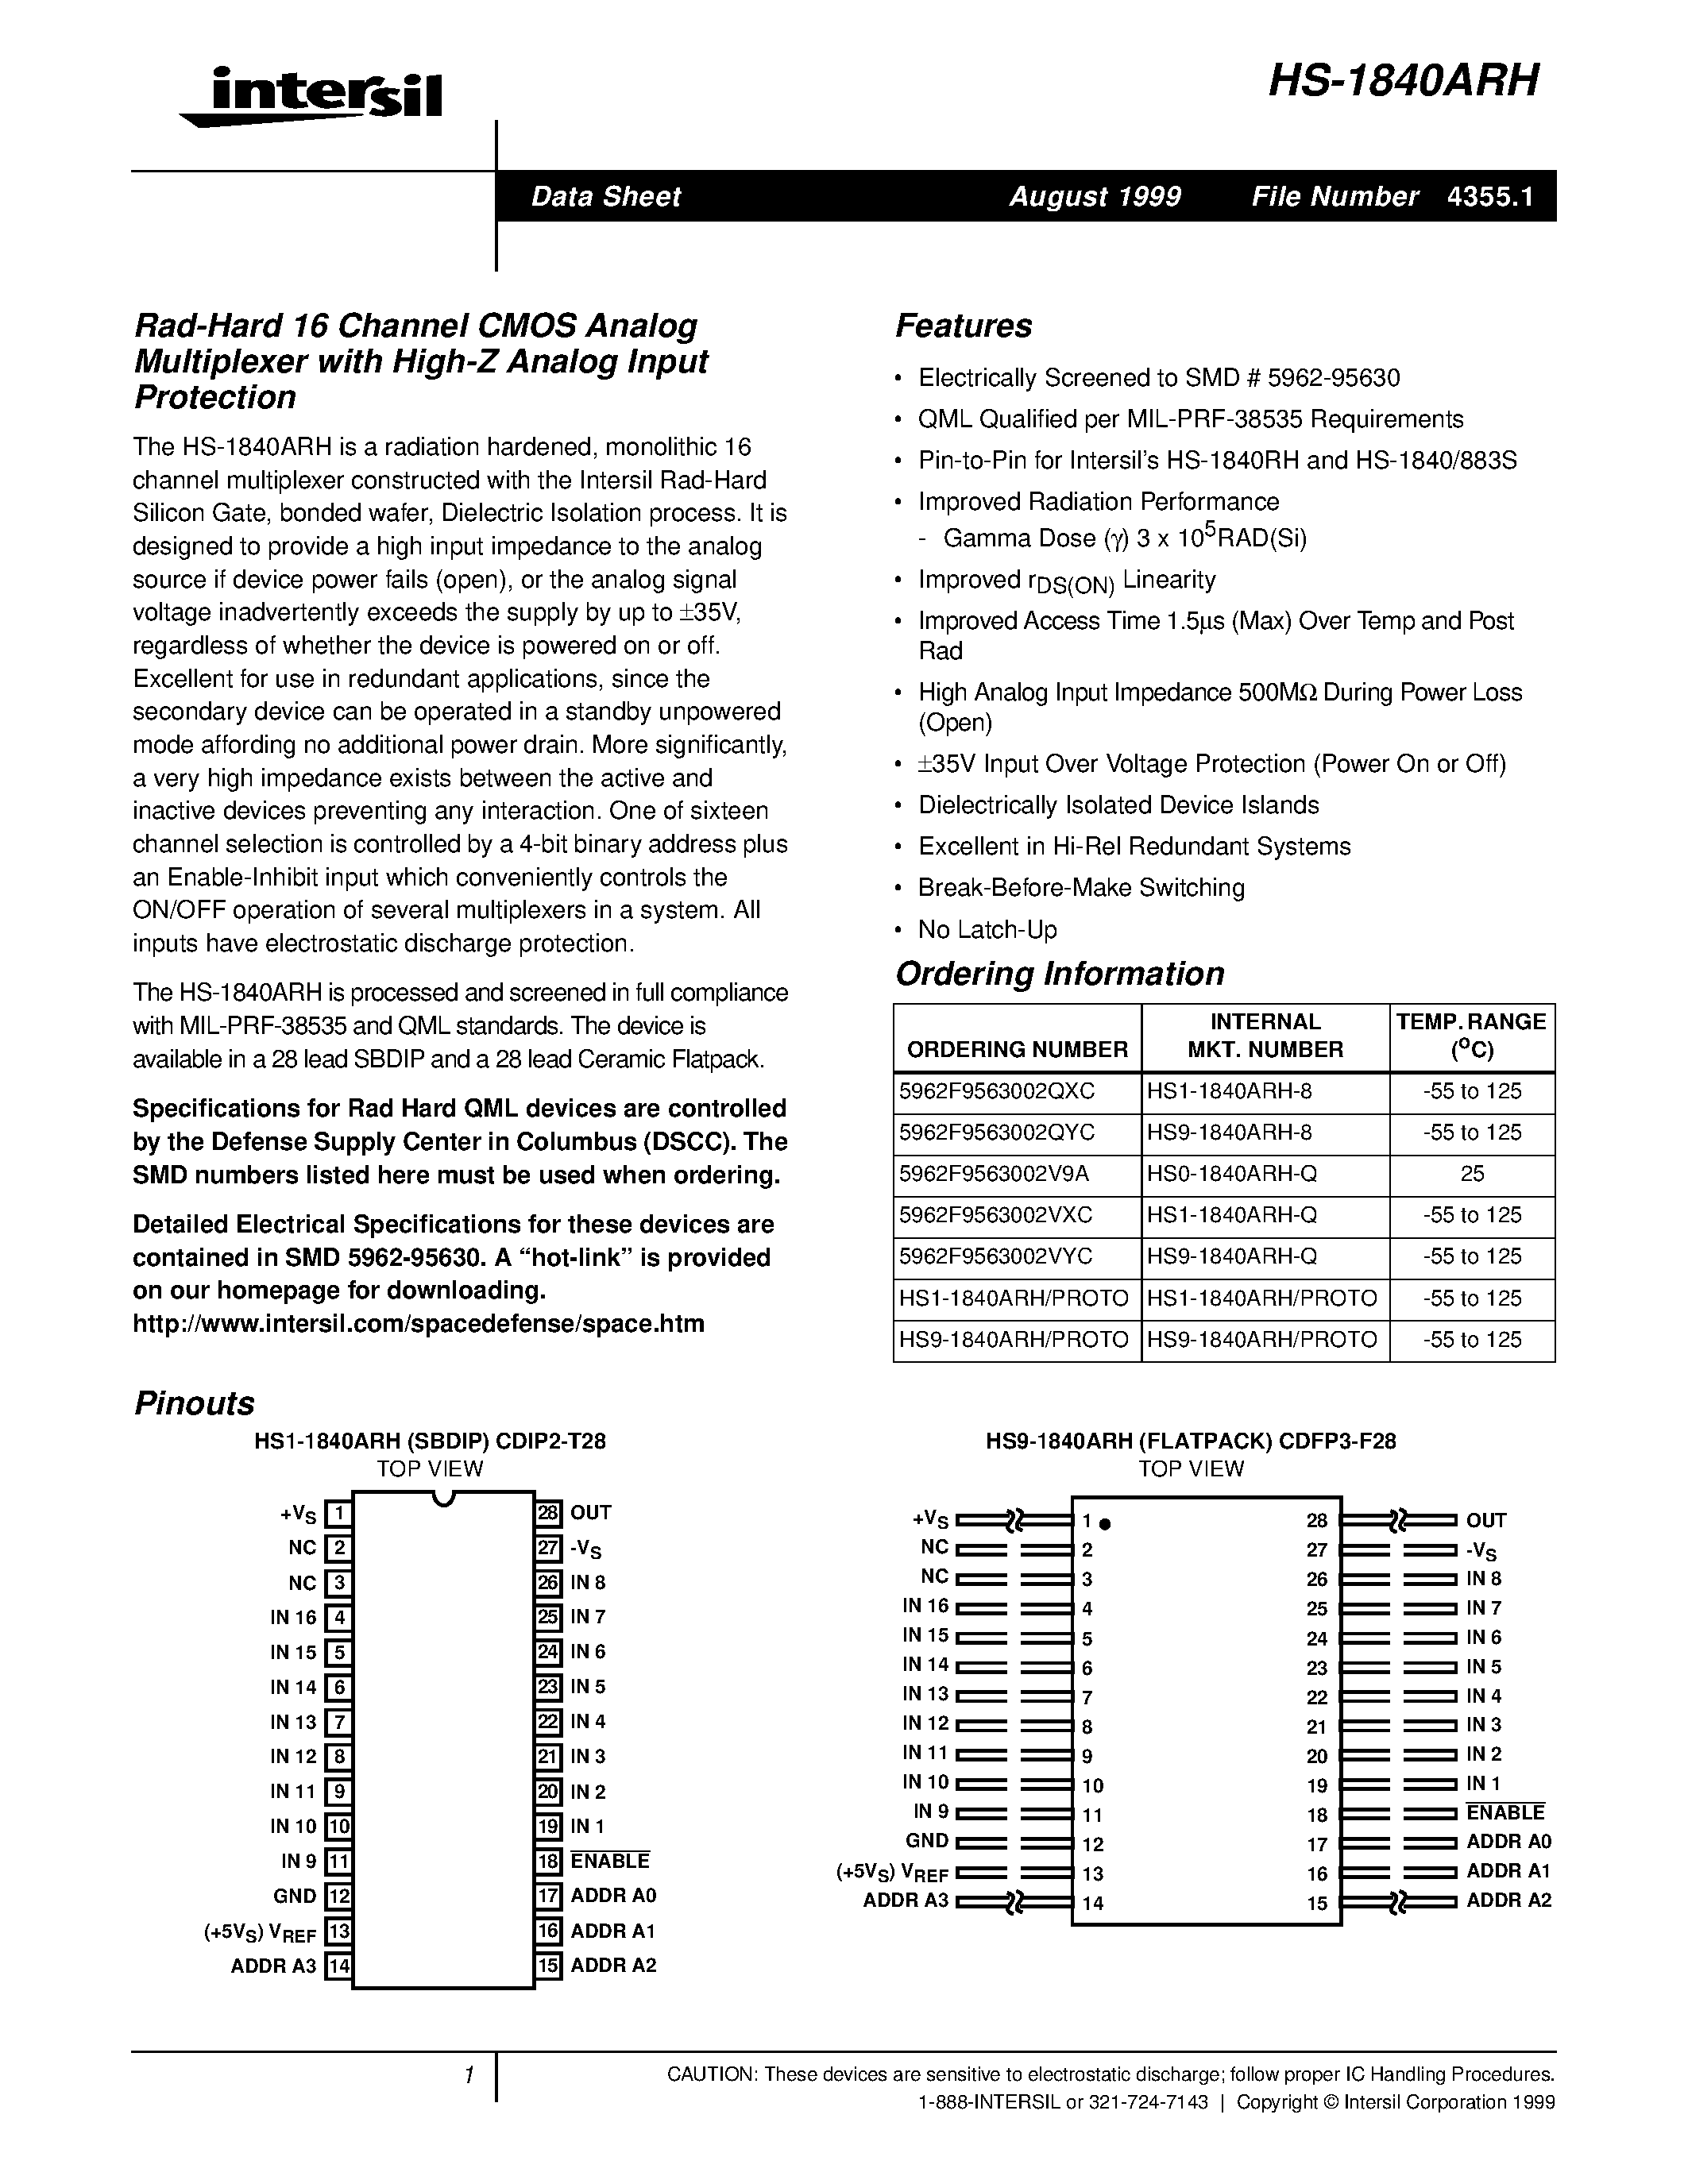 Datasheet HS1-1840ARH-8 - Rad-Hard 16 Channel CMOS Analog Multiplexer with High-Z Analog Input Protection page 1